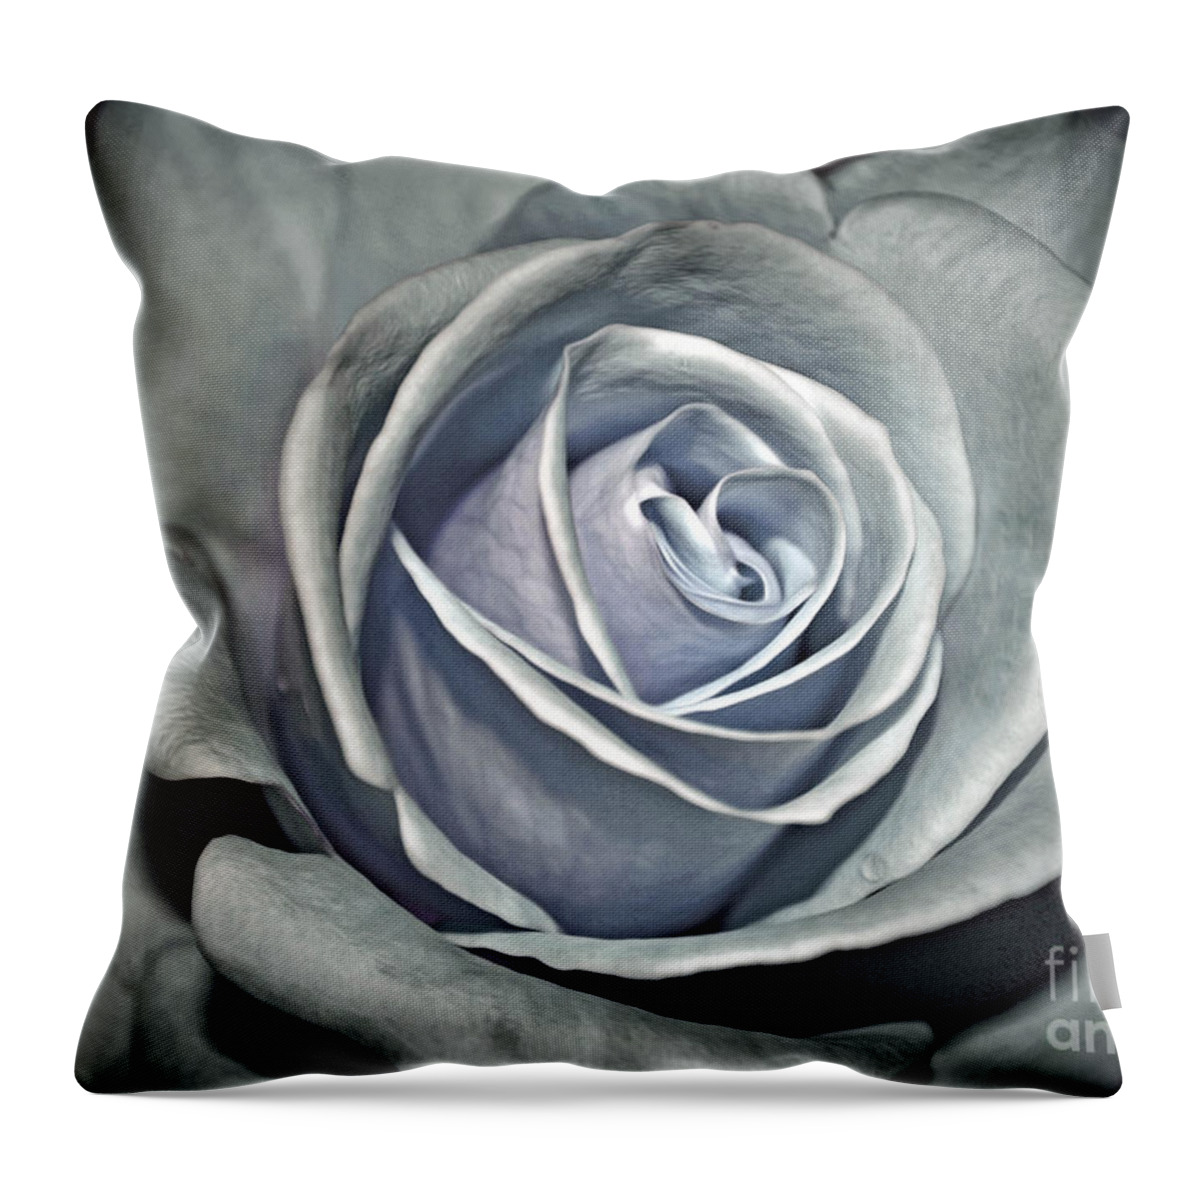 Rose Throw Pillow featuring the photograph Baby Blue Rose by Savannah Gibbs